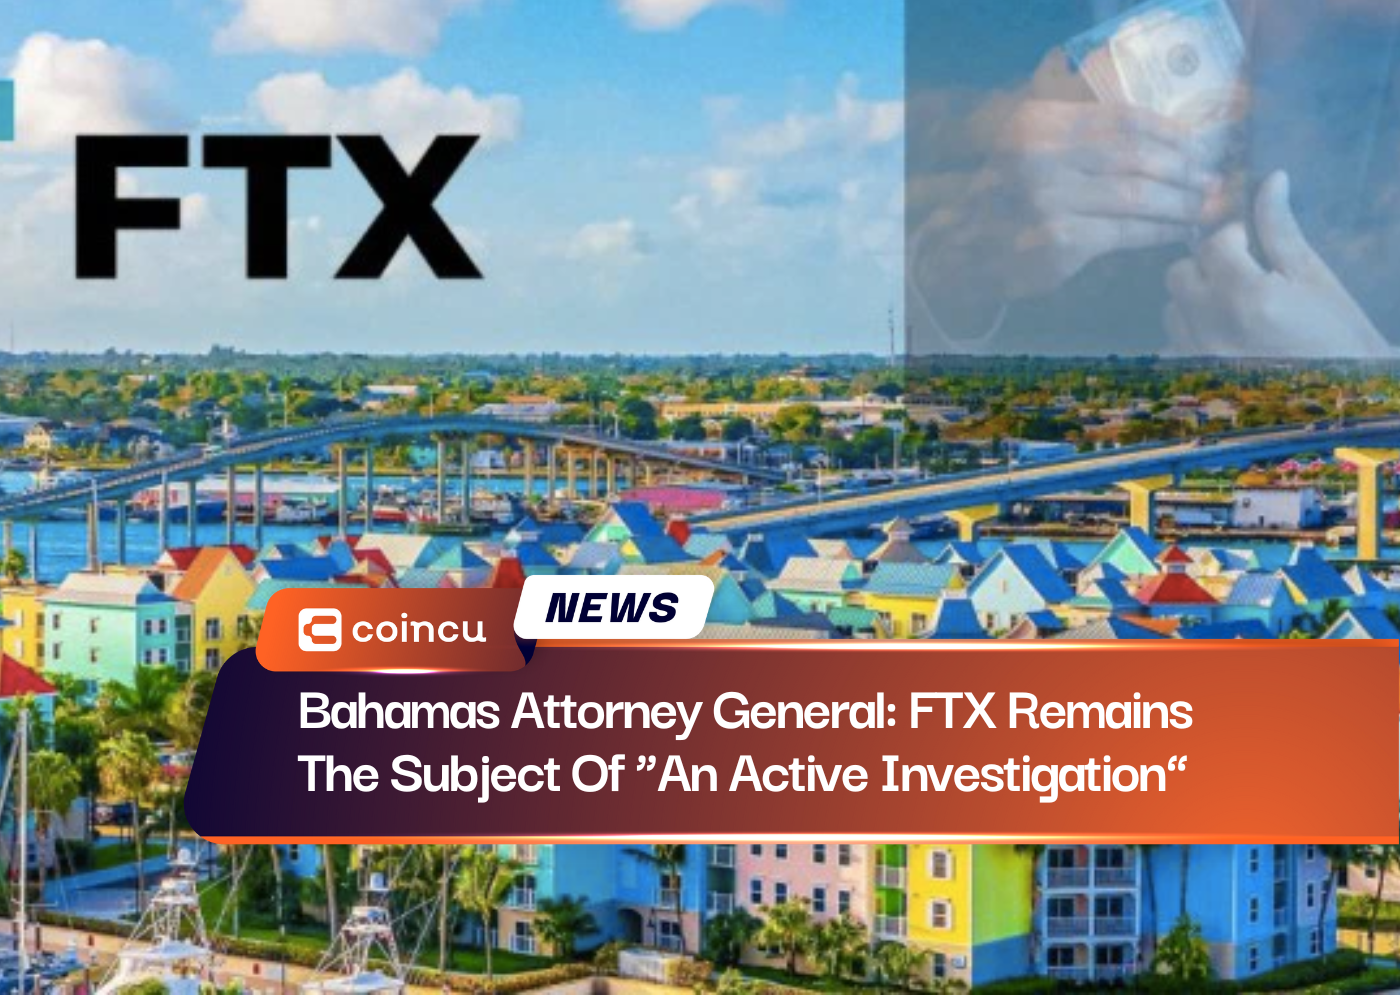 Bahamas Attorney General: FTX Remains The Subject Of “An Active Investigation”